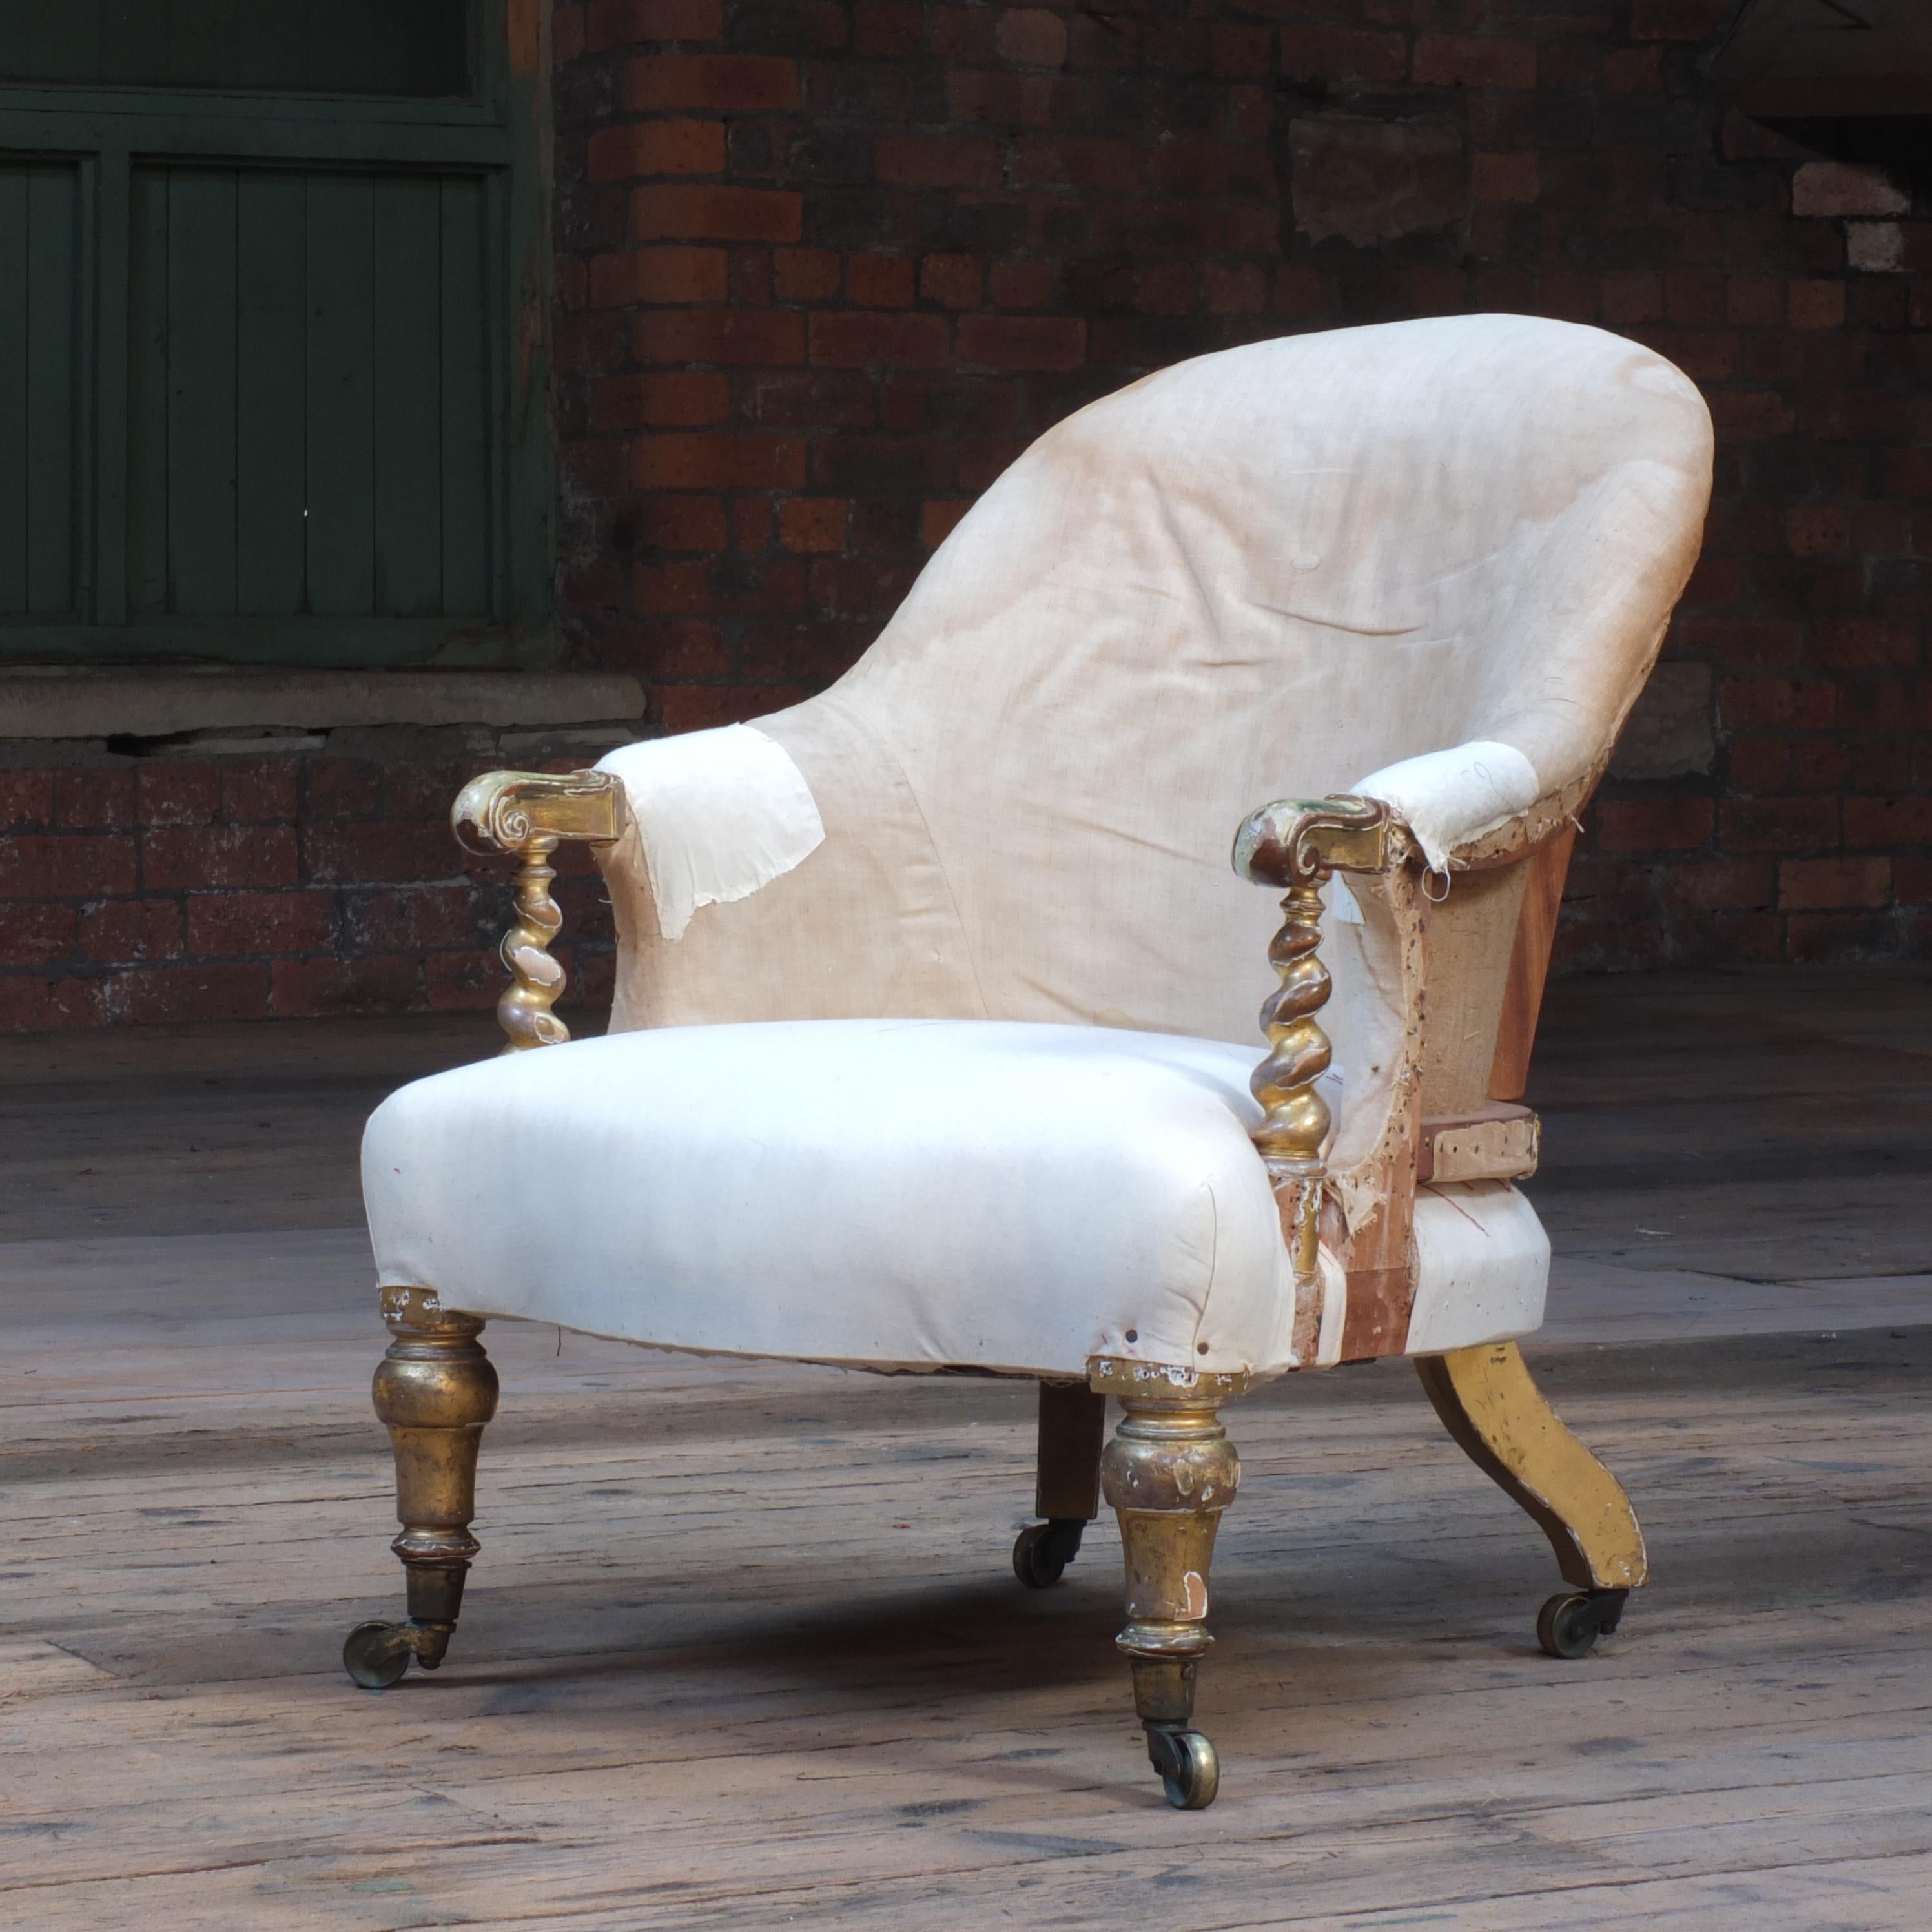 A fine quality mid 19th century gilt walnut armchair by Hindley & sons - Miles & Edwards c1844. In good structural condition throughout. The gilt showing signs of wear but in my opinion very attractively. Raised on nicely turned front legs on